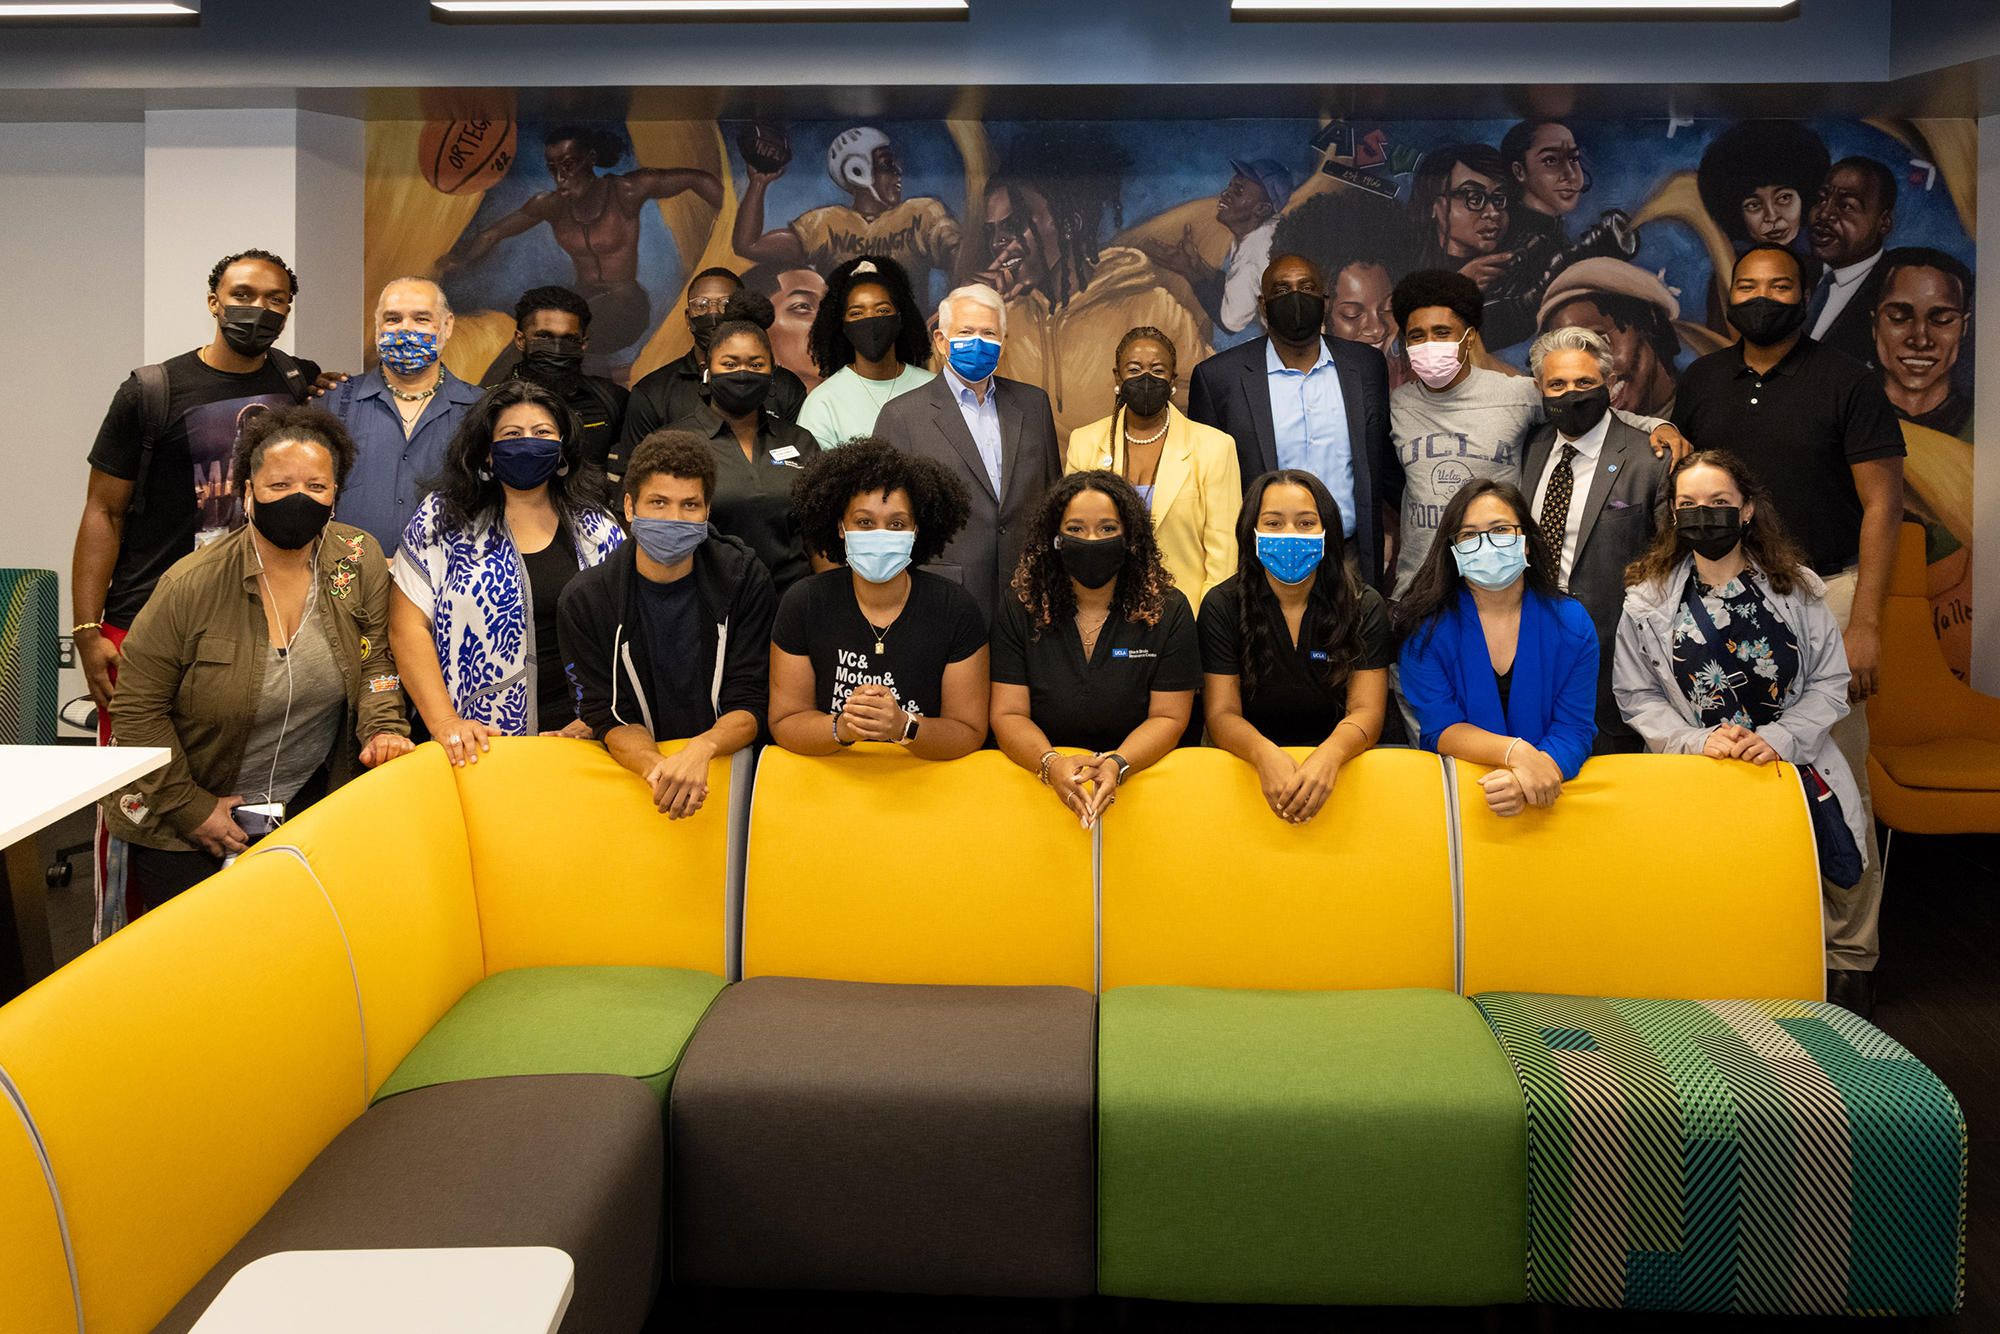 A large group donning COVID masks take space in front of a hand painted mural, depicting notable Black Bruins. Chancellor Block can be seen in the center